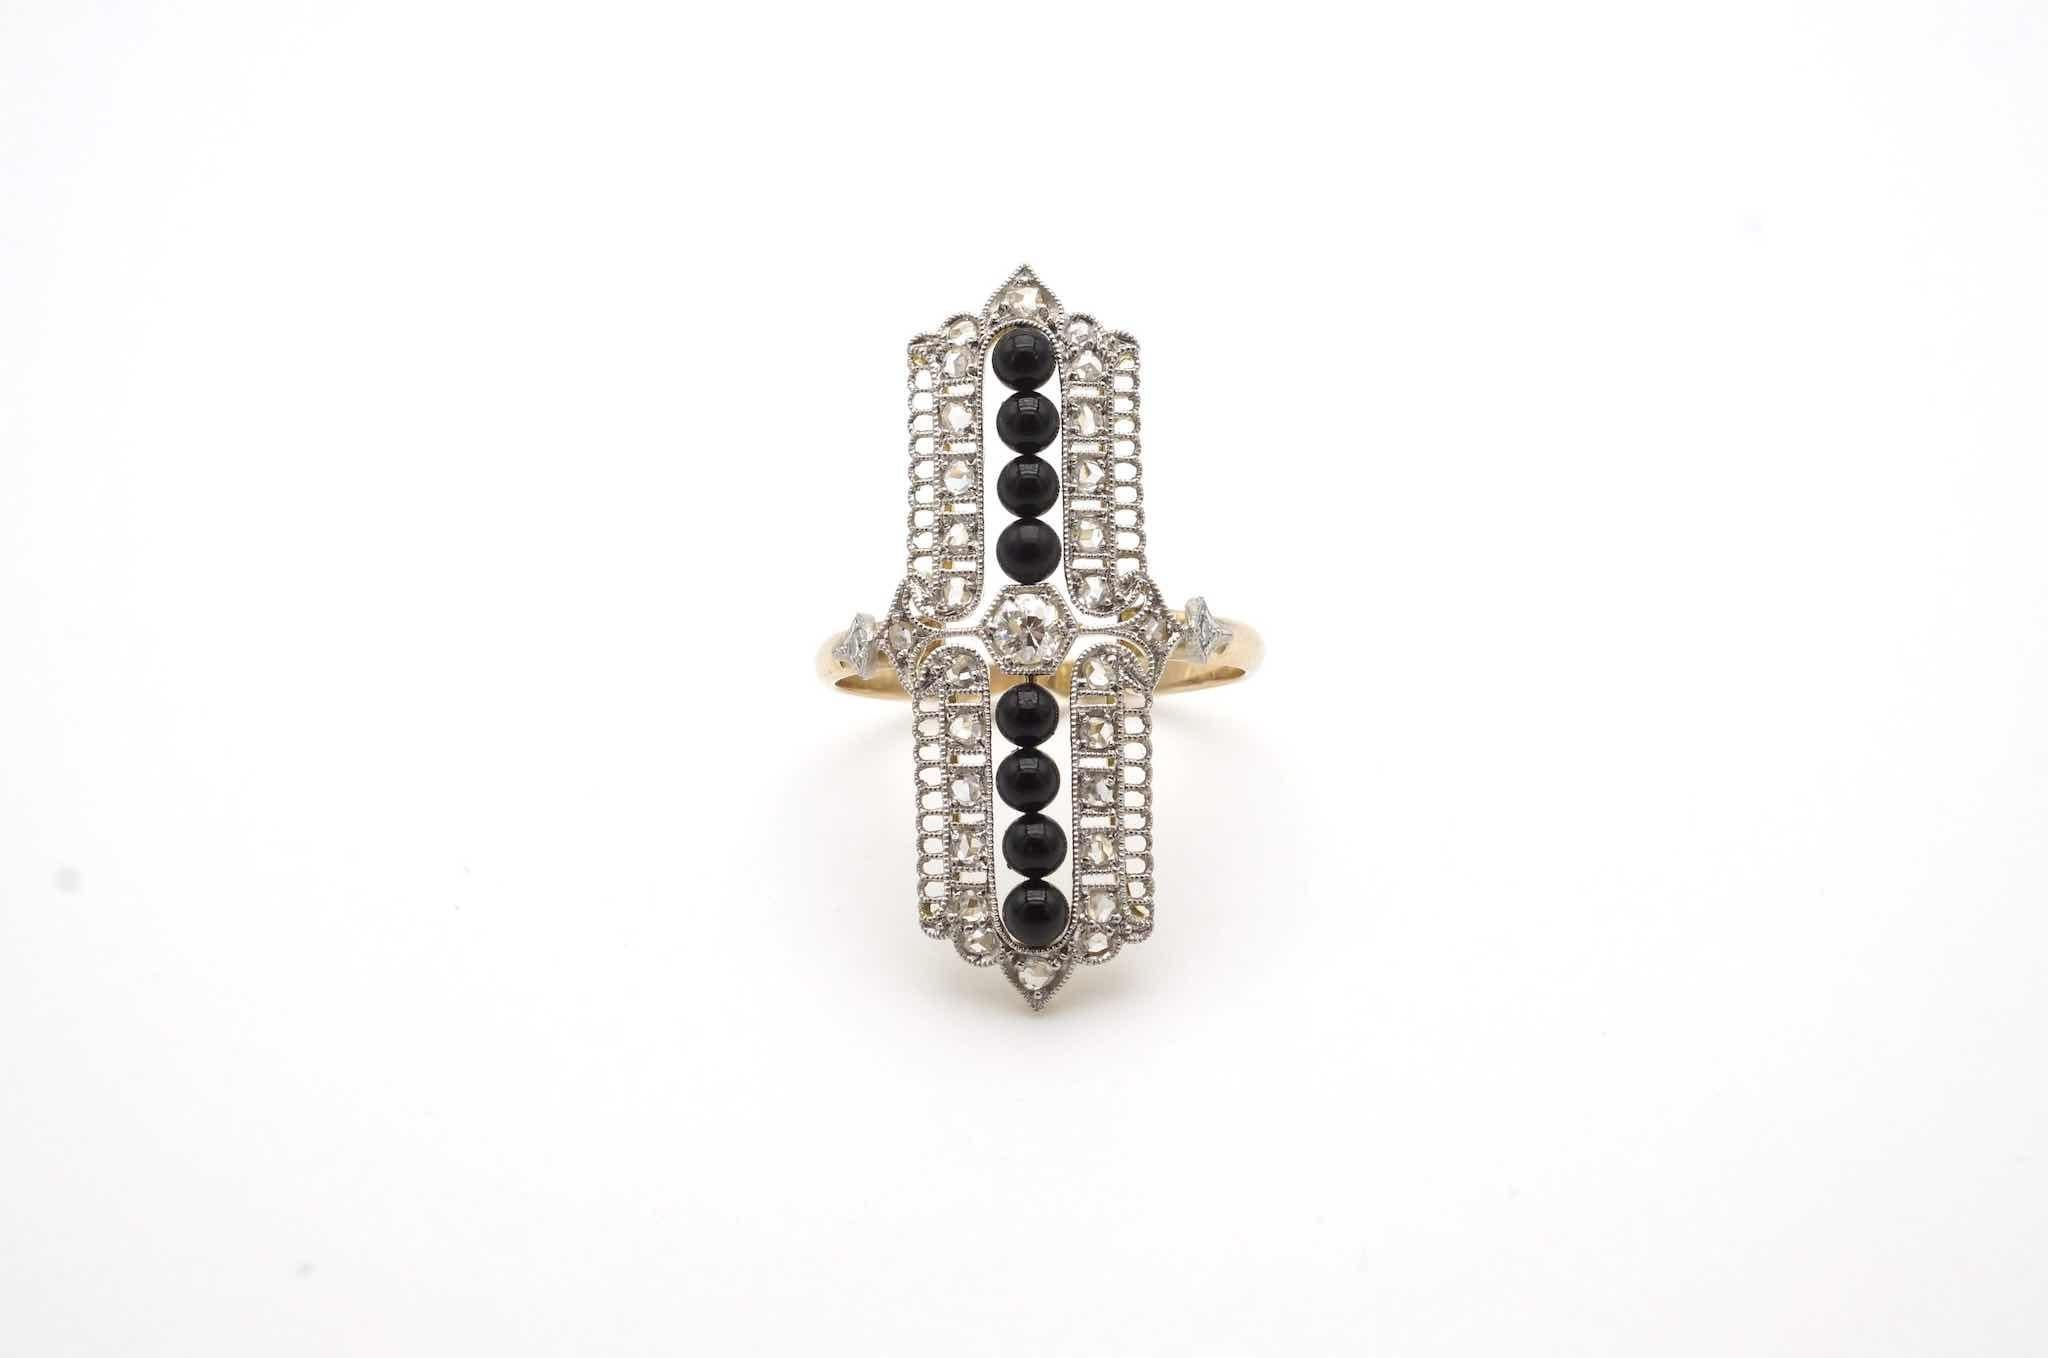 Stones: Onyx and rose-cut diamonds for a total weight of 0.20 carat
Material: Platinum and 18k yellow gold
Dimensions: 1cm x 3.2cm length on finger
Period: 1920
Weight: 4.5g
Size: 57 (free sizing)
Certificate
Ref. : 24718